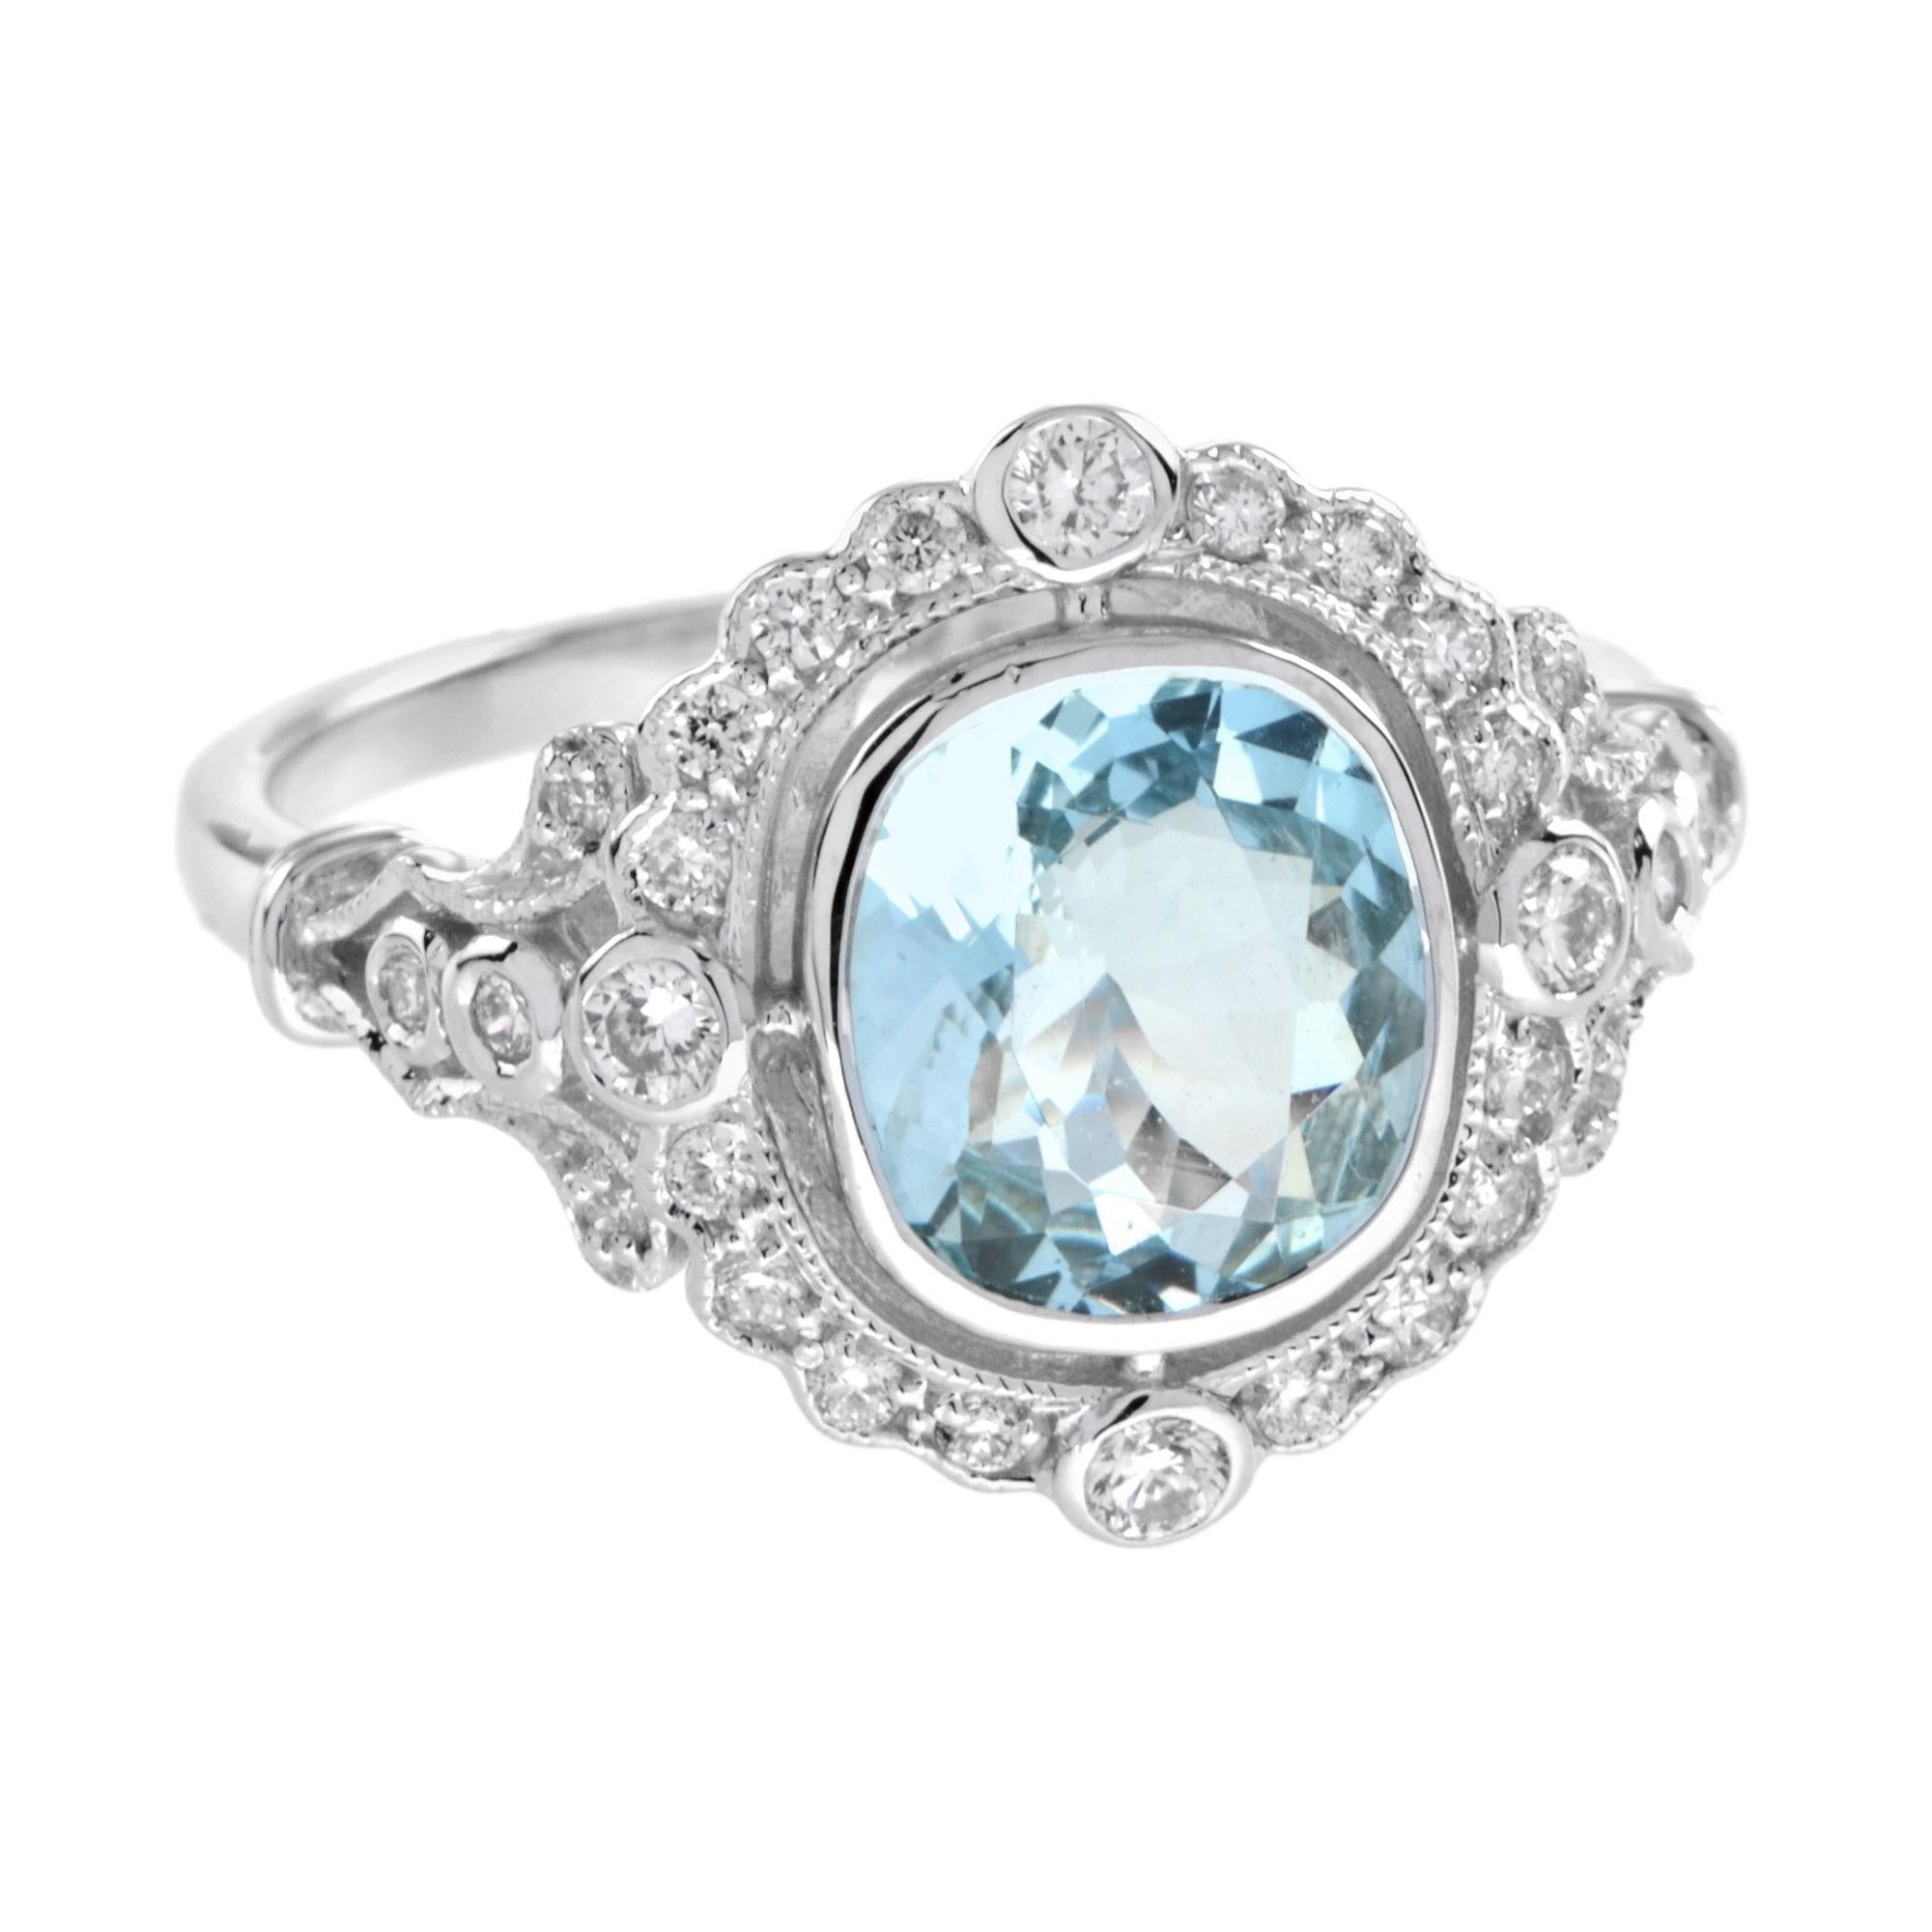 For Sale:  Antique Style Cushion Aquamarine with Diamond Halo Engagement Ring in 18K Gold 2